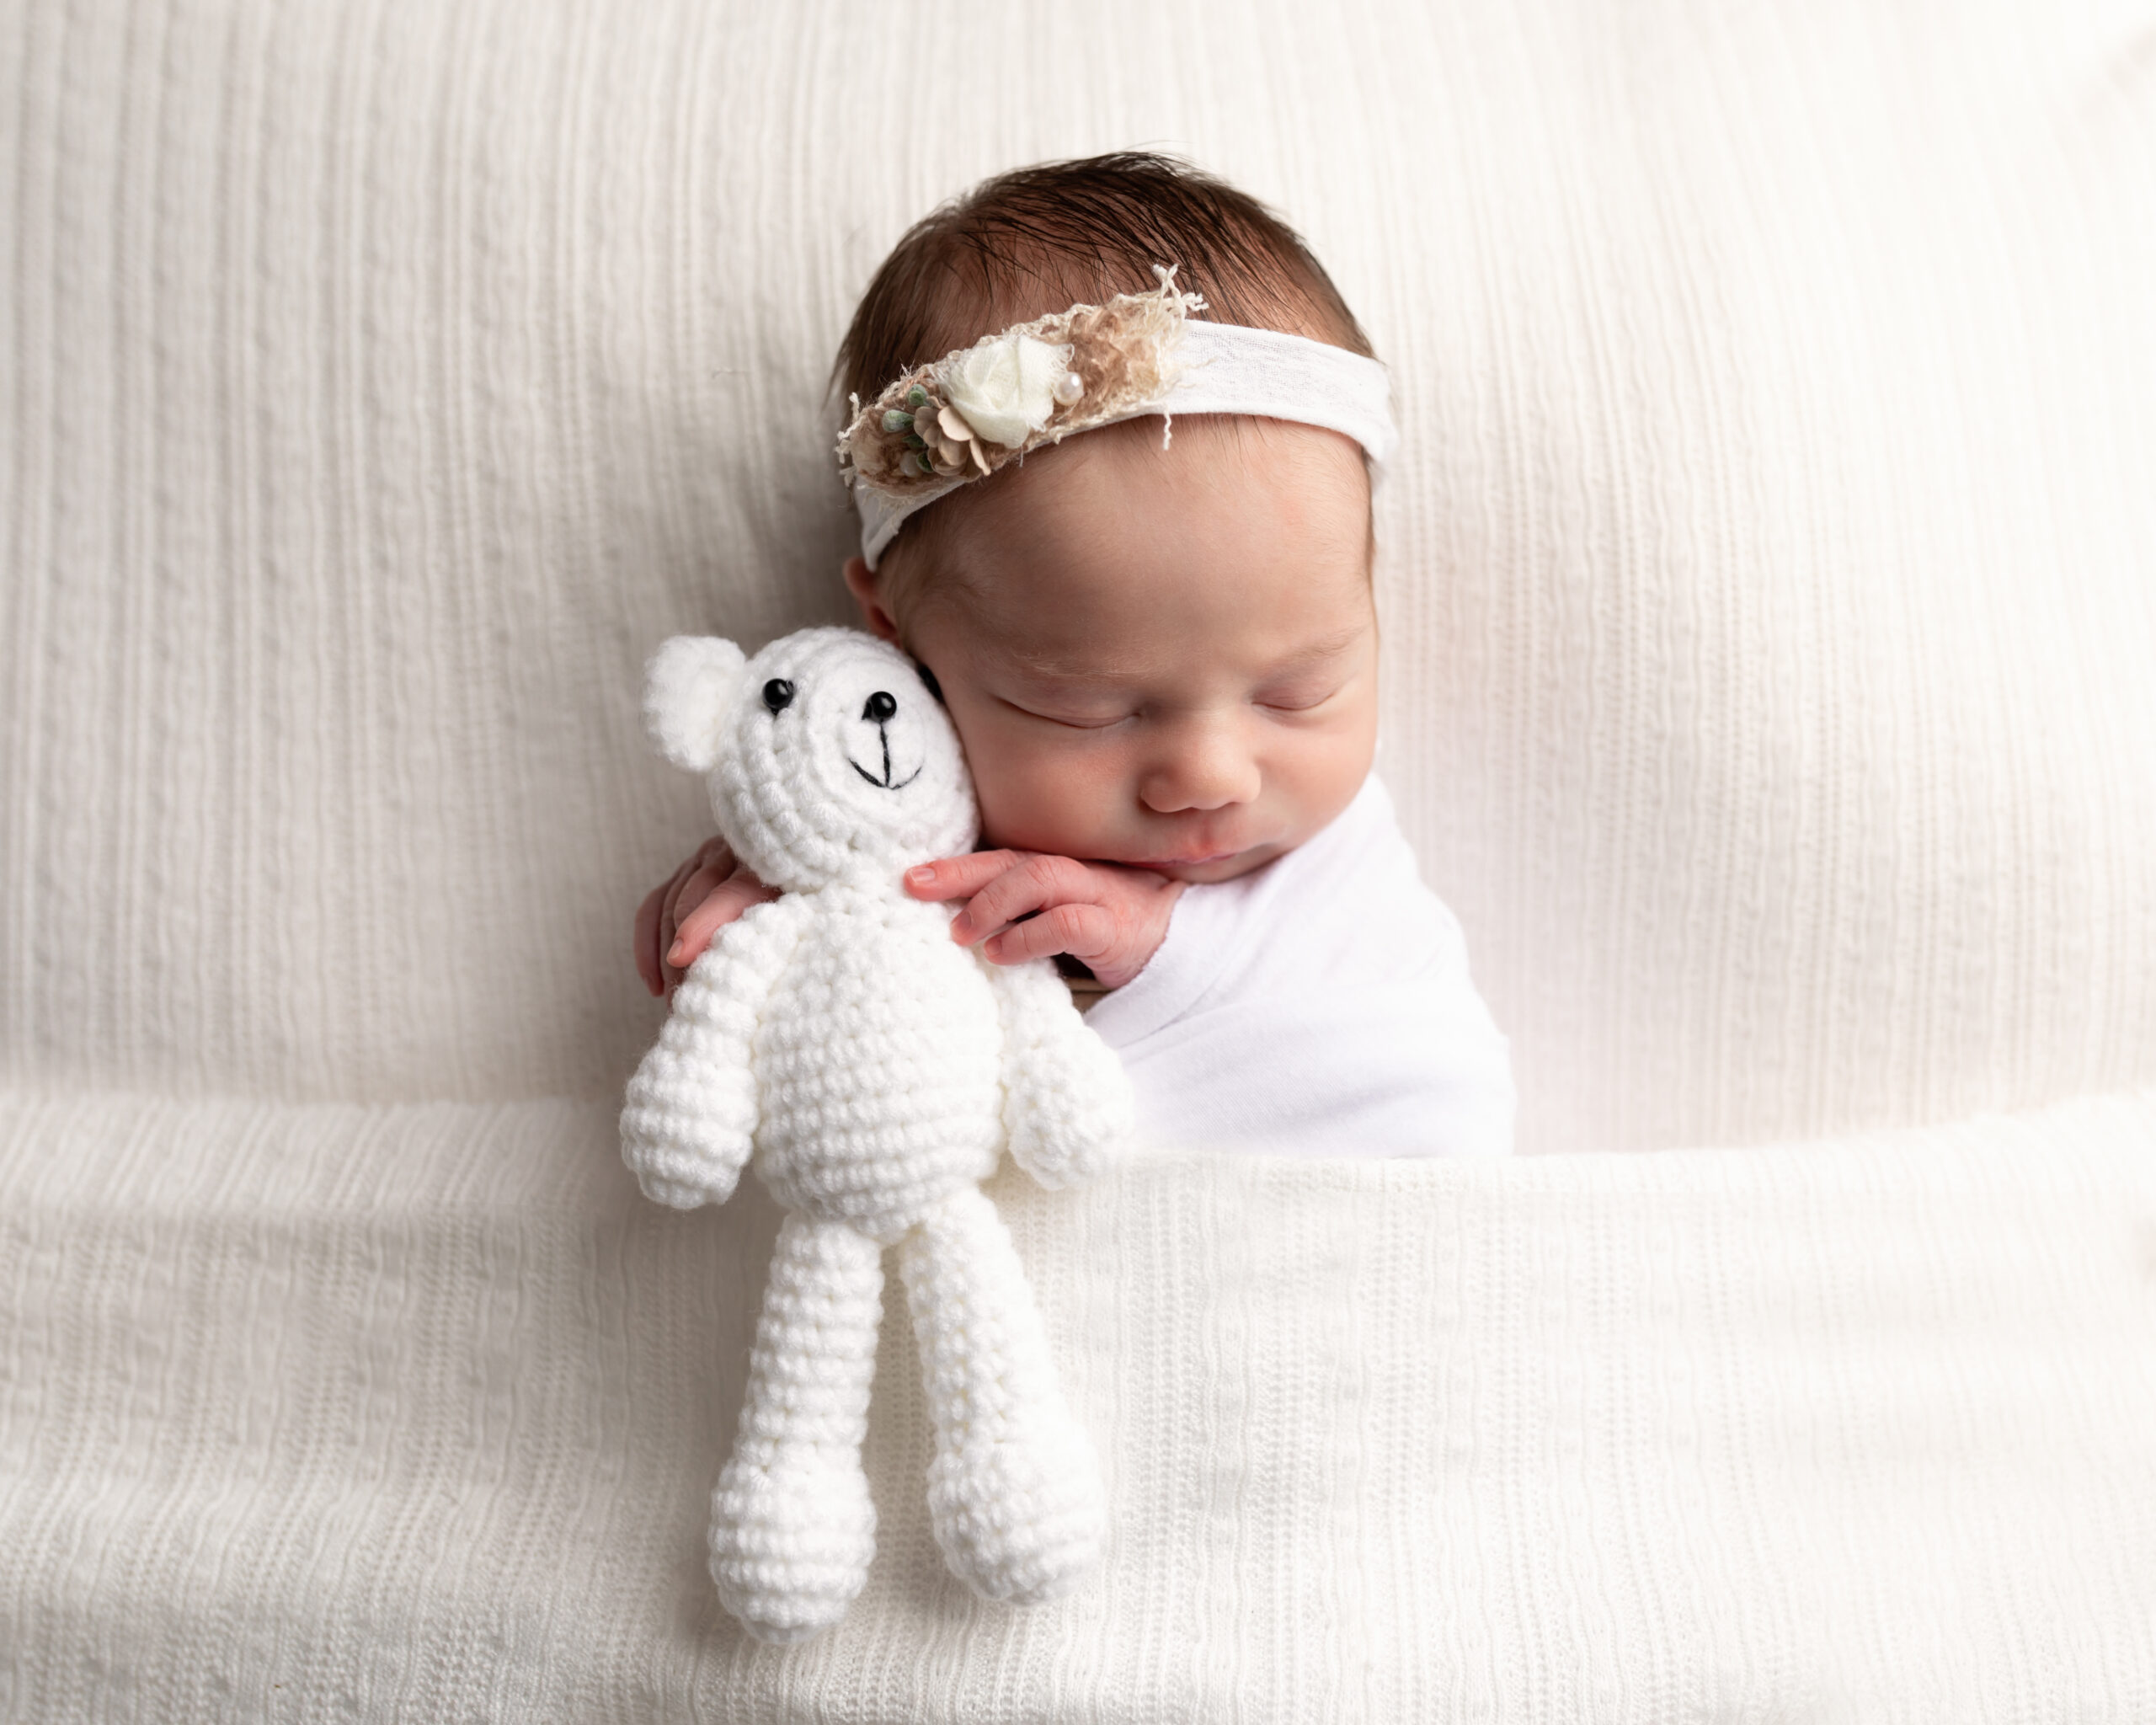 baby wrapped in white holding teddy bear for studio portraits